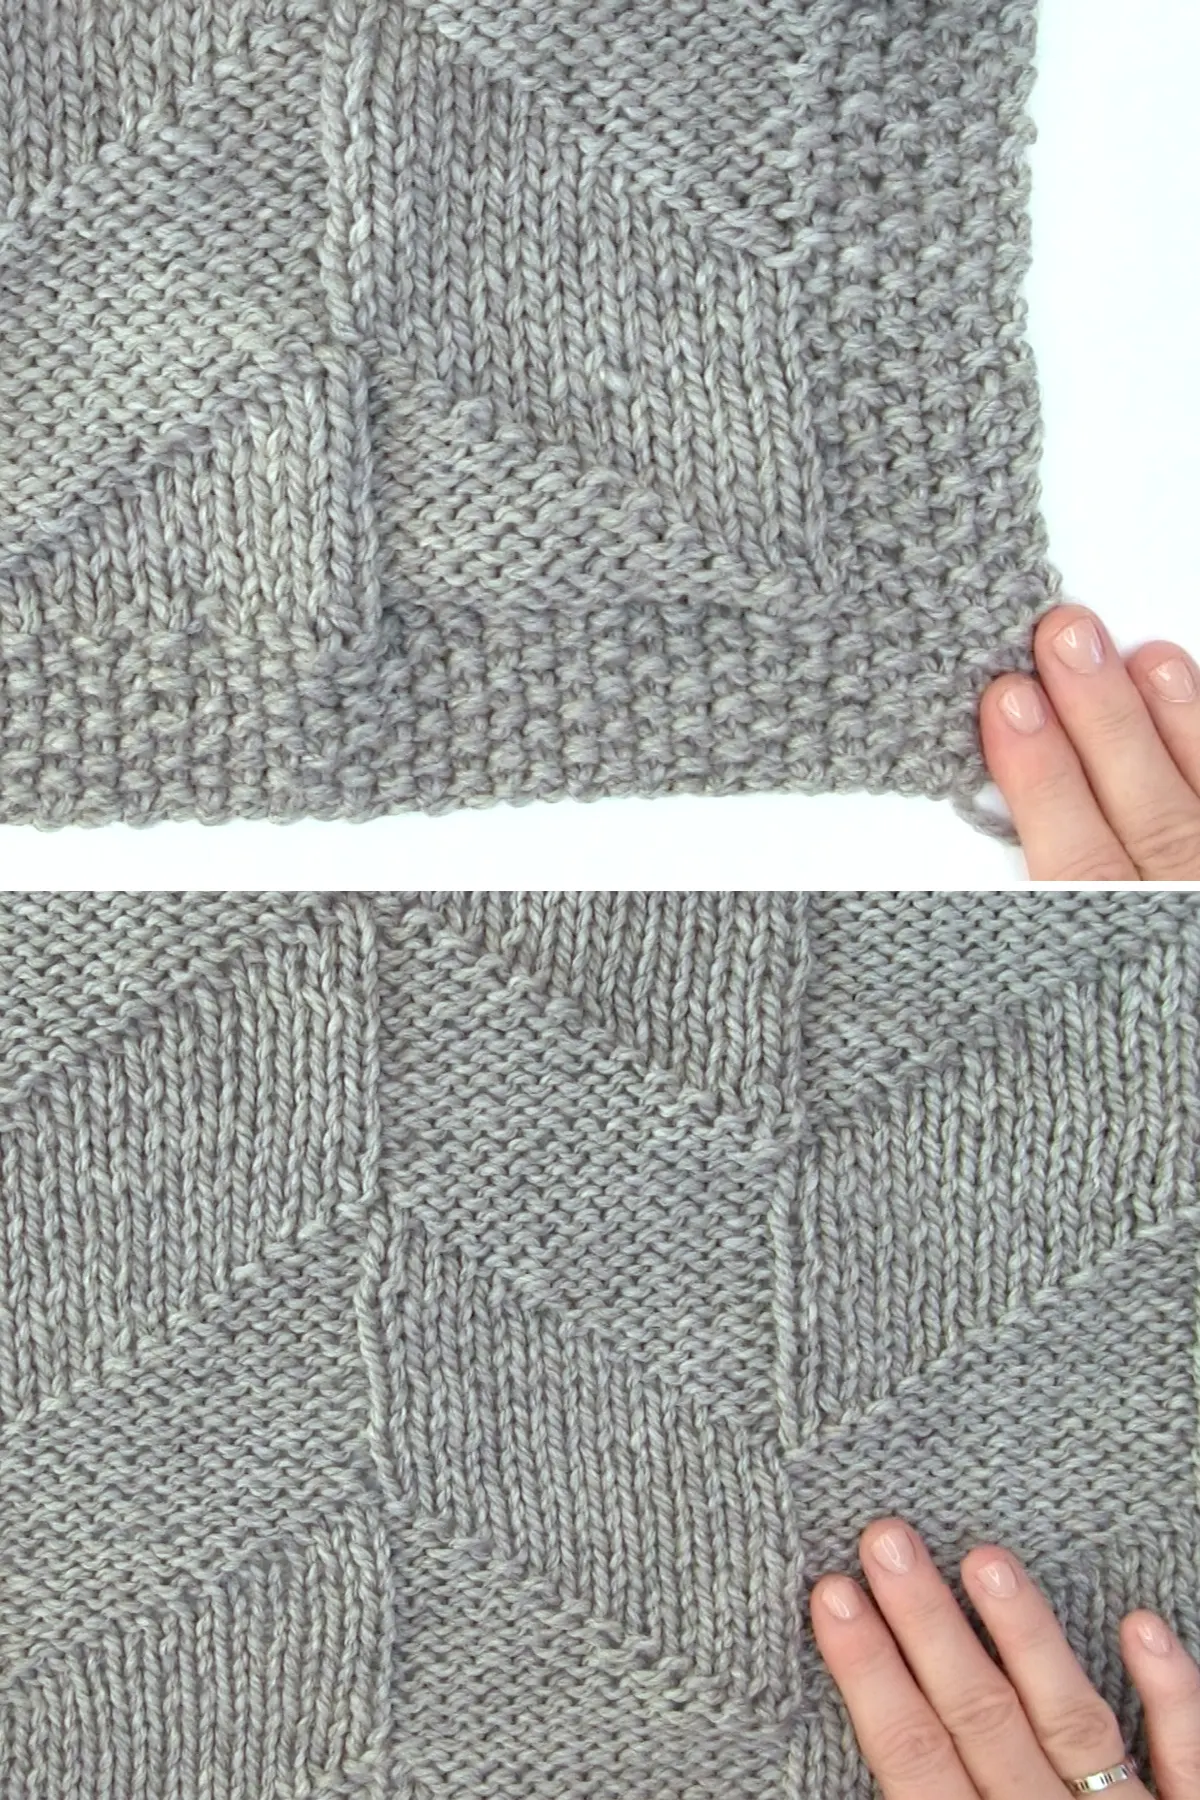 Parallelogram Blanket texture in grey colored yarn with seed stitch border.